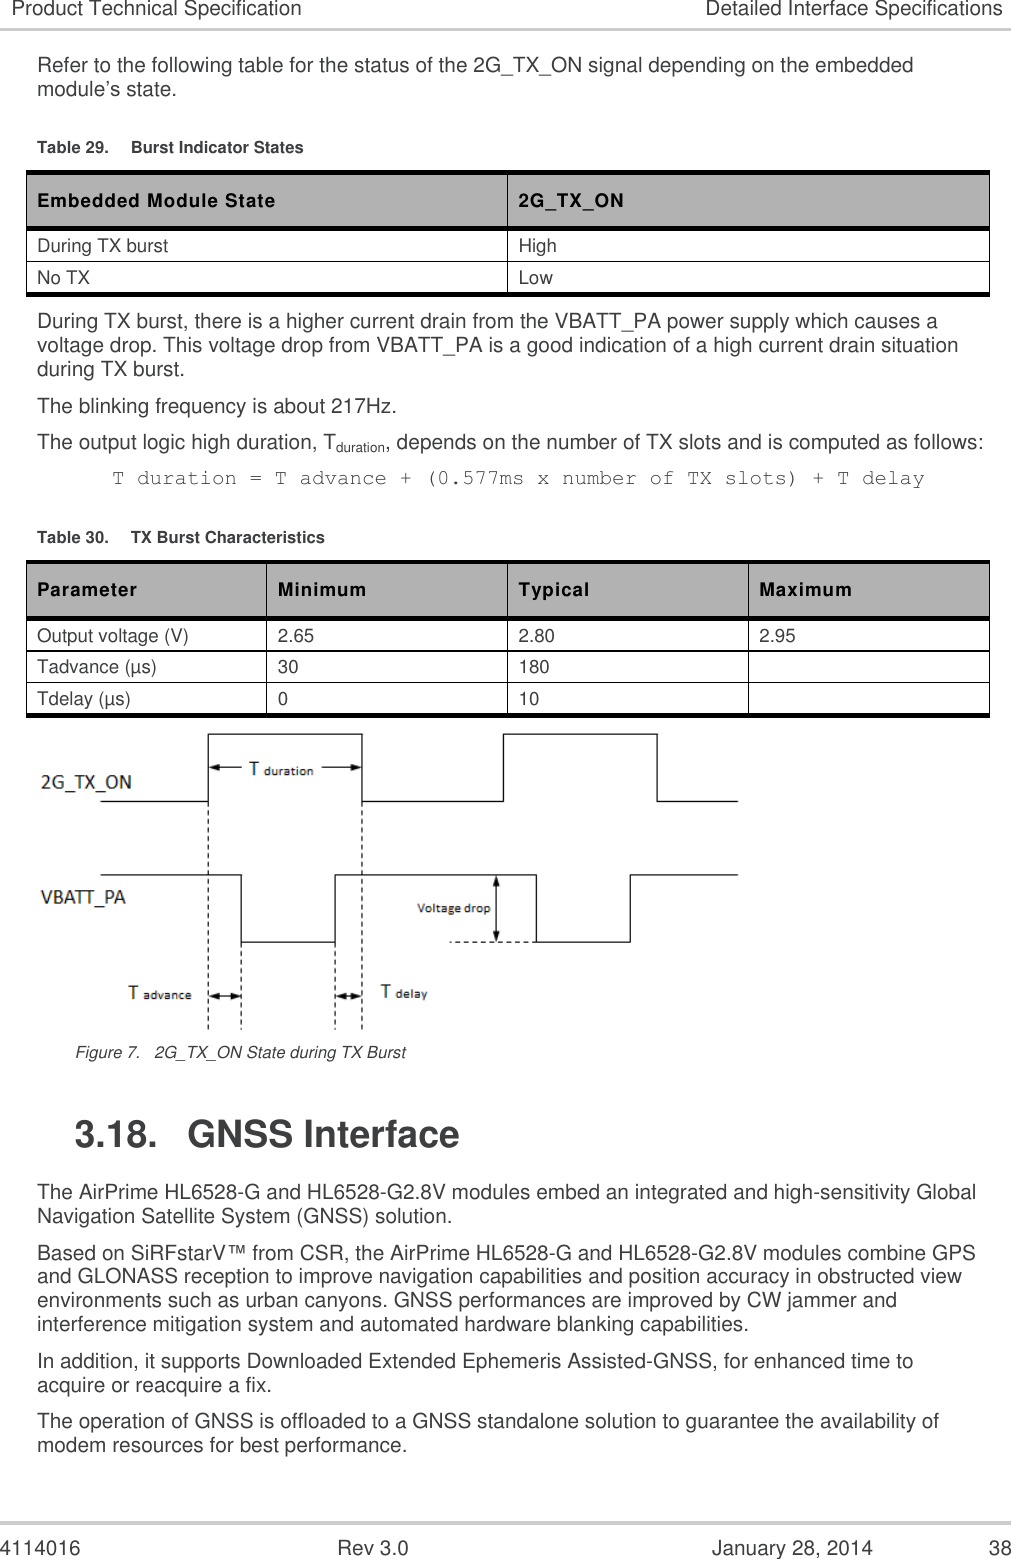  4114016  Rev 3.0  January 28, 2014  38 Product Technical Specification Detailed Interface Specifications Refer to the following table for the status of the 2G_TX_ON signal depending on the embedded module’s state. Table 29.  Burst Indicator States Embedded Module State 2G_TX_ON During TX burst High No TX Low During TX burst, there is a higher current drain from the VBATT_PA power supply which causes a voltage drop. This voltage drop from VBATT_PA is a good indication of a high current drain situation during TX burst. The blinking frequency is about 217Hz. The output logic high duration, Tduration, depends on the number of TX slots and is computed as follows: T duration = T advance + (0.577ms x number of TX slots) + T delay Table 30.  TX Burst Characteristics Parameter Minimum Typical Maximum Output voltage (V) 2.65 2.80 2.95 Tadvance (µs) 30 180  Tdelay (µs) 0 10   Figure 7.  2G_TX_ON State during TX Burst 3.18.  GNSS Interface The AirPrime HL6528-G and HL6528-G2.8V modules embed an integrated and high-sensitivity Global Navigation Satellite System (GNSS) solution.  Based on SiRFstarV™ from CSR, the AirPrime HL6528-G and HL6528-G2.8V modules combine GPS and GLONASS reception to improve navigation capabilities and position accuracy in obstructed view environments such as urban canyons. GNSS performances are improved by CW jammer and interference mitigation system and automated hardware blanking capabilities. In addition, it supports Downloaded Extended Ephemeris Assisted-GNSS, for enhanced time to acquire or reacquire a fix. The operation of GNSS is offloaded to a GNSS standalone solution to guarantee the availability of modem resources for best performance. 